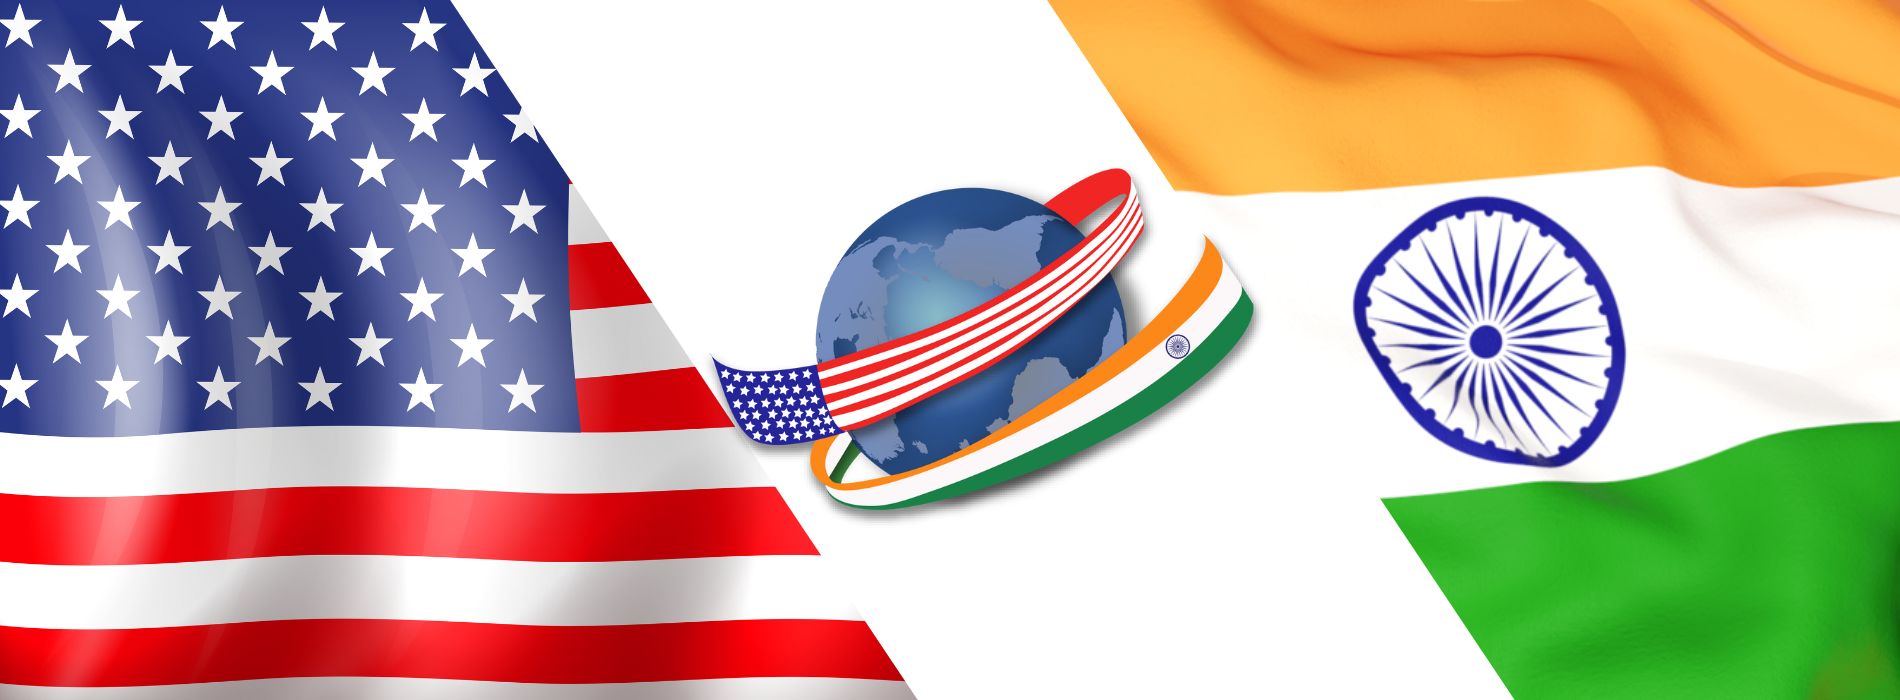 india-us-chamber-of-commerce-south-florida